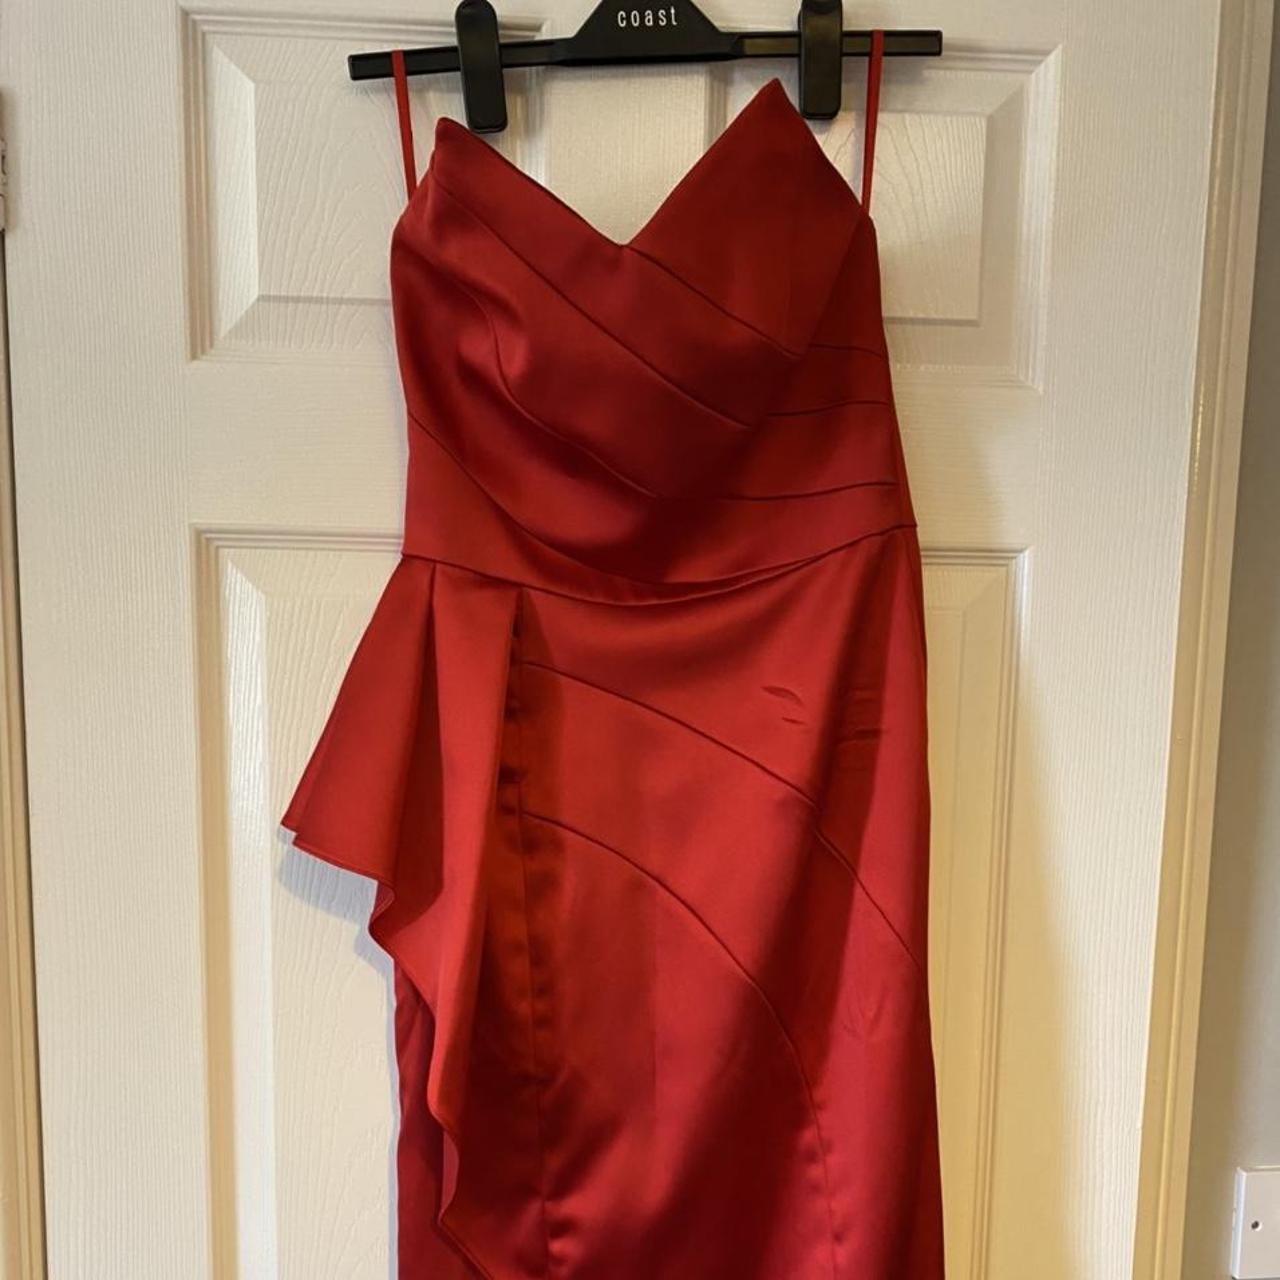 Beautiful red Coast dress 😍 perfect for a... - Depop